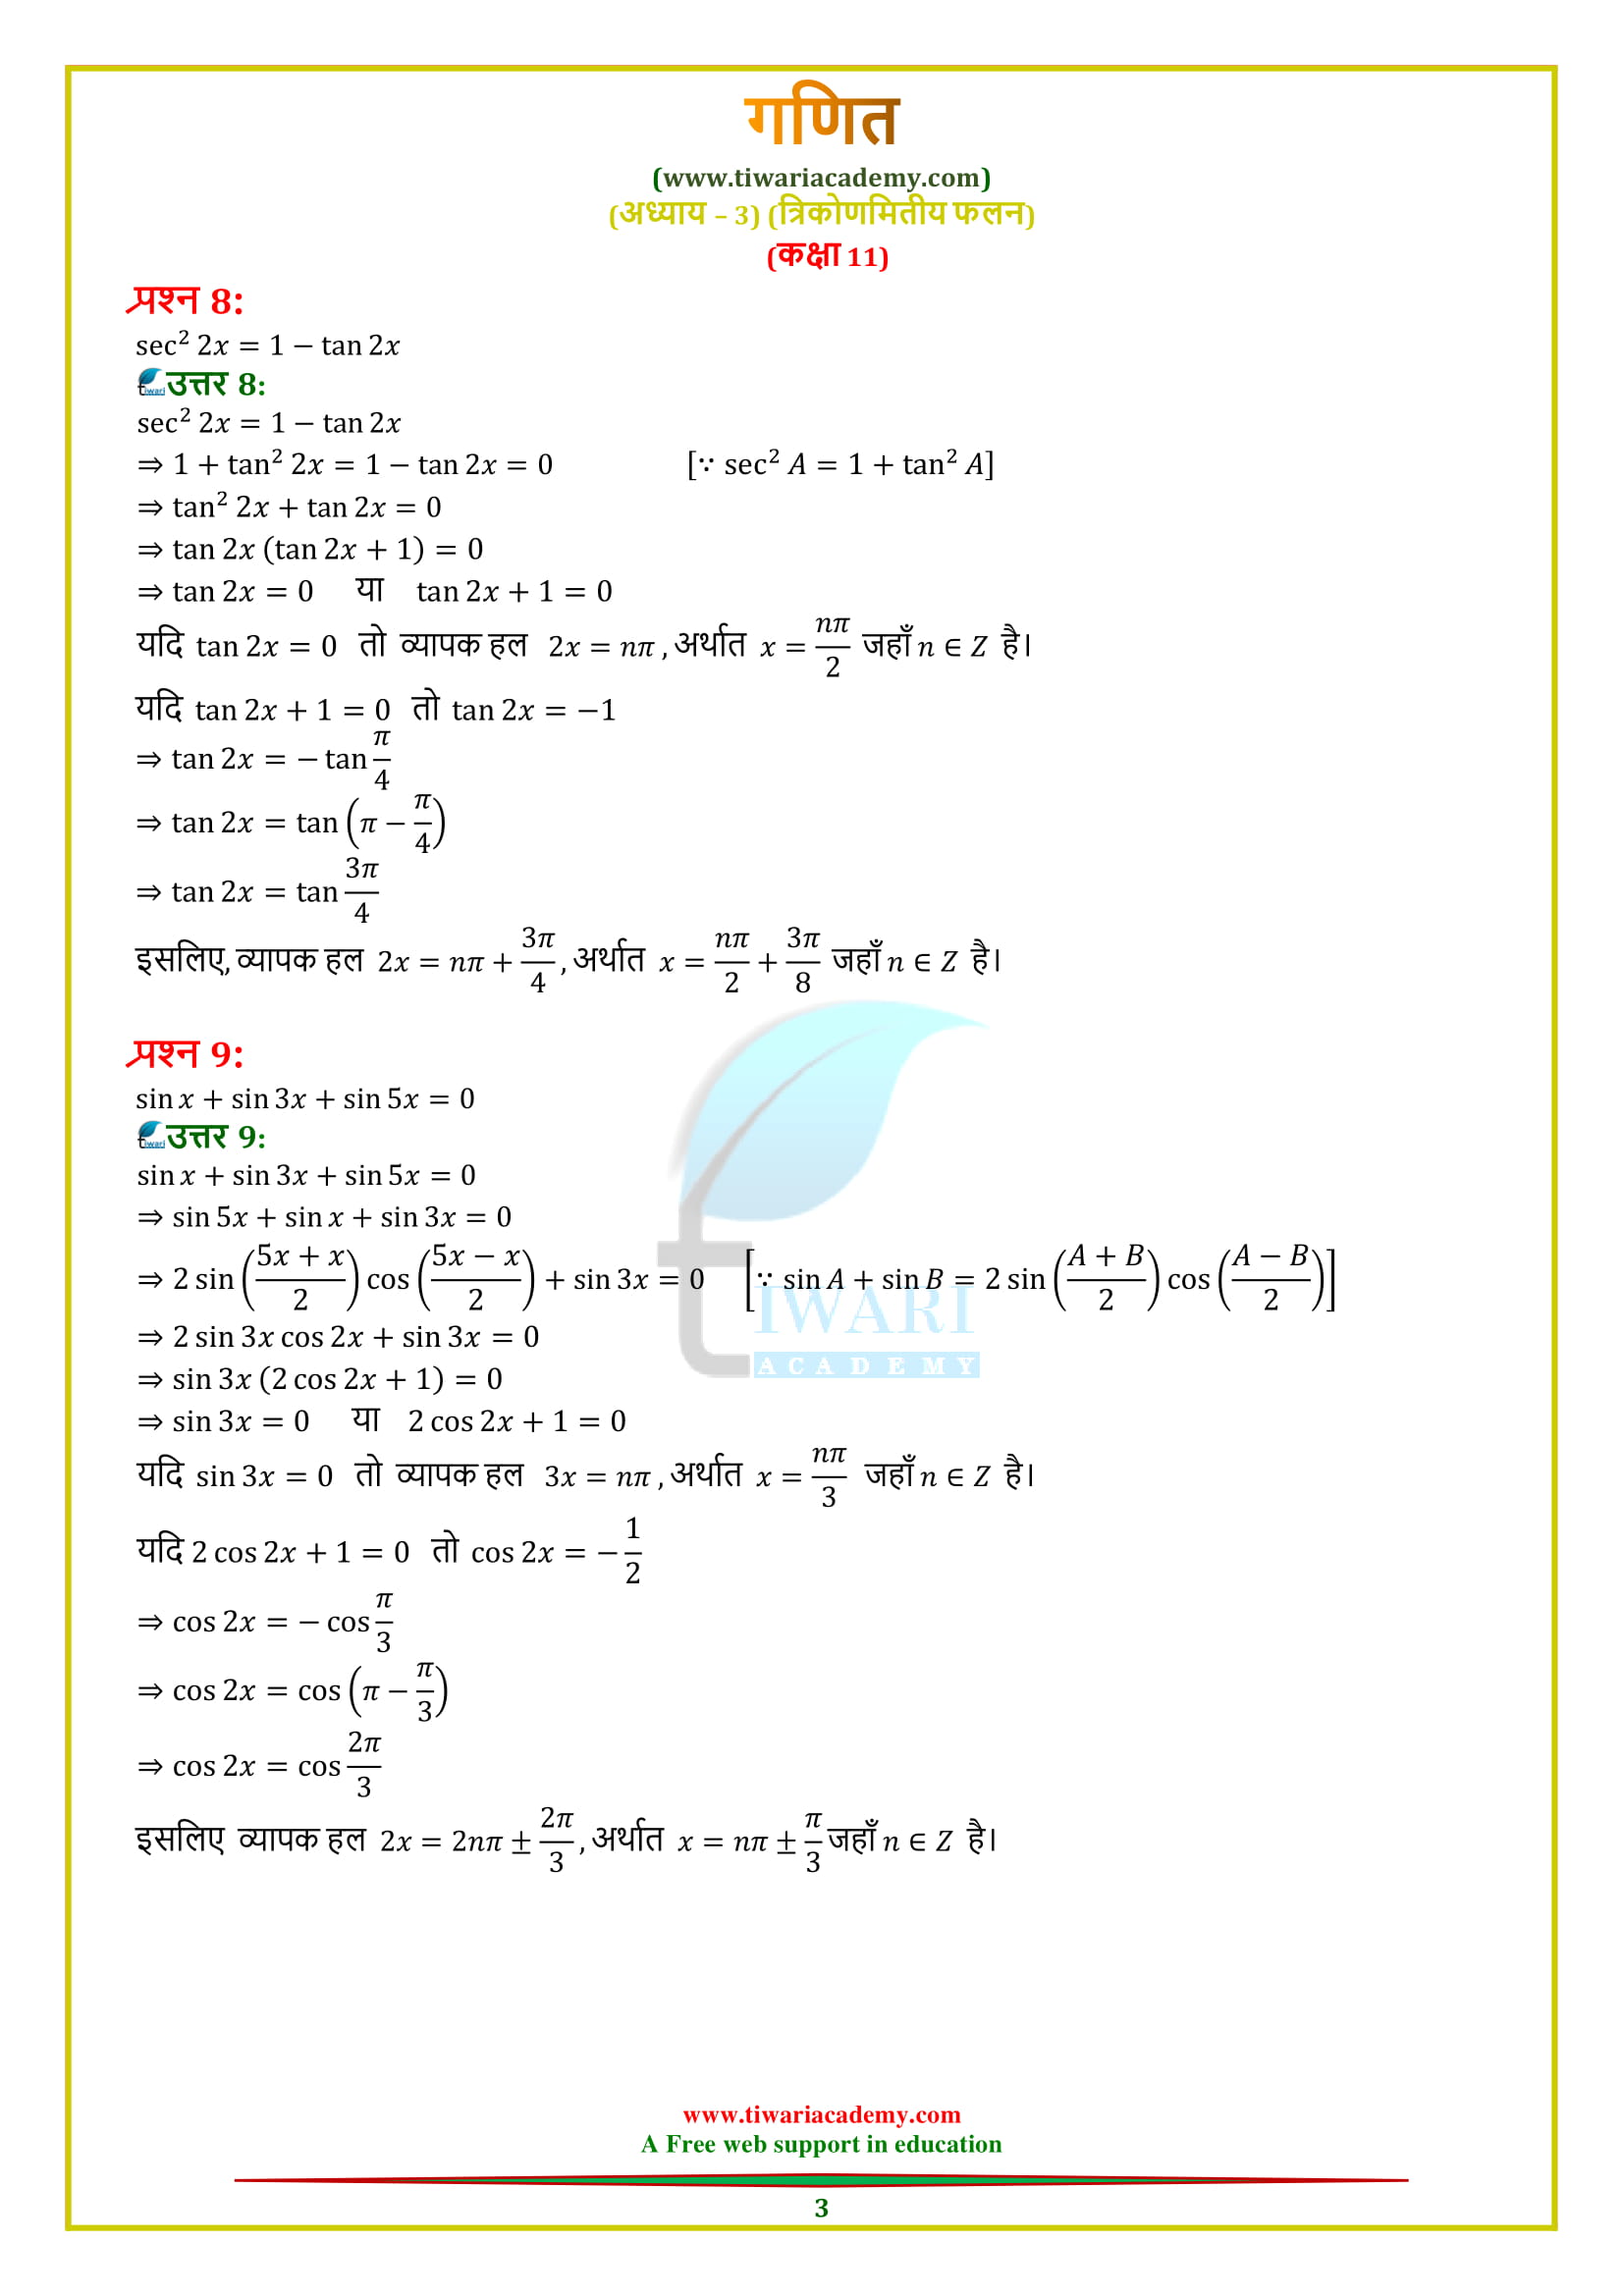 NCERT Solutions for Class 11 Maths Chapter 3 Exercise 3.4 free in PDF